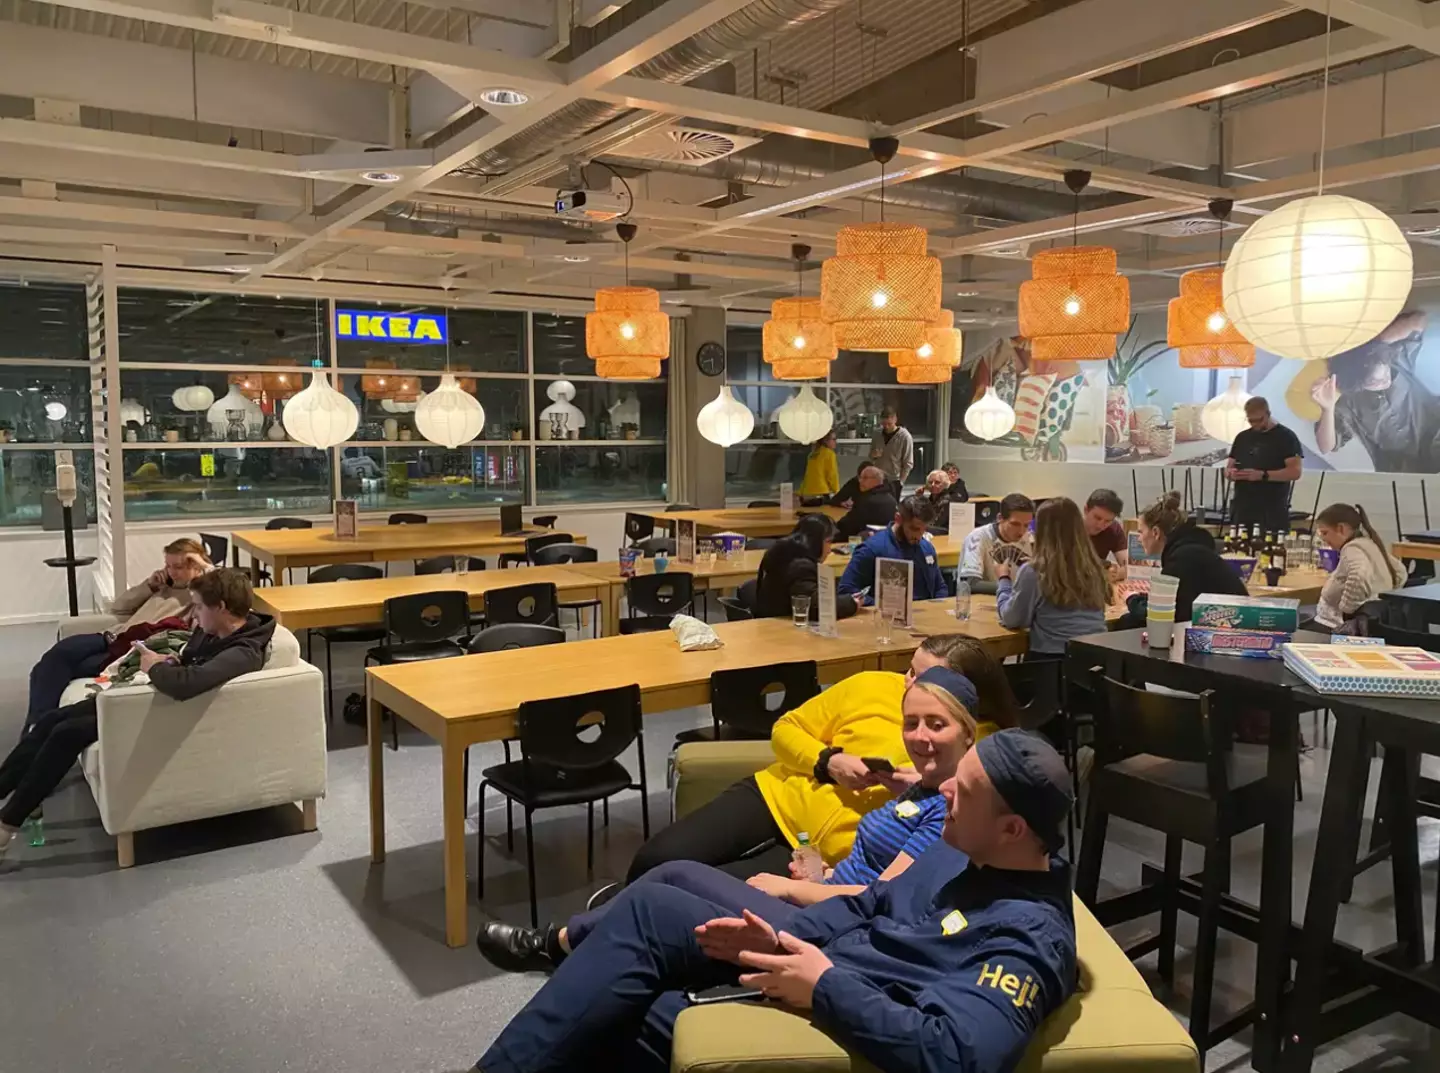 Members of staff and customers making the most of their time stuck inside IKEA.